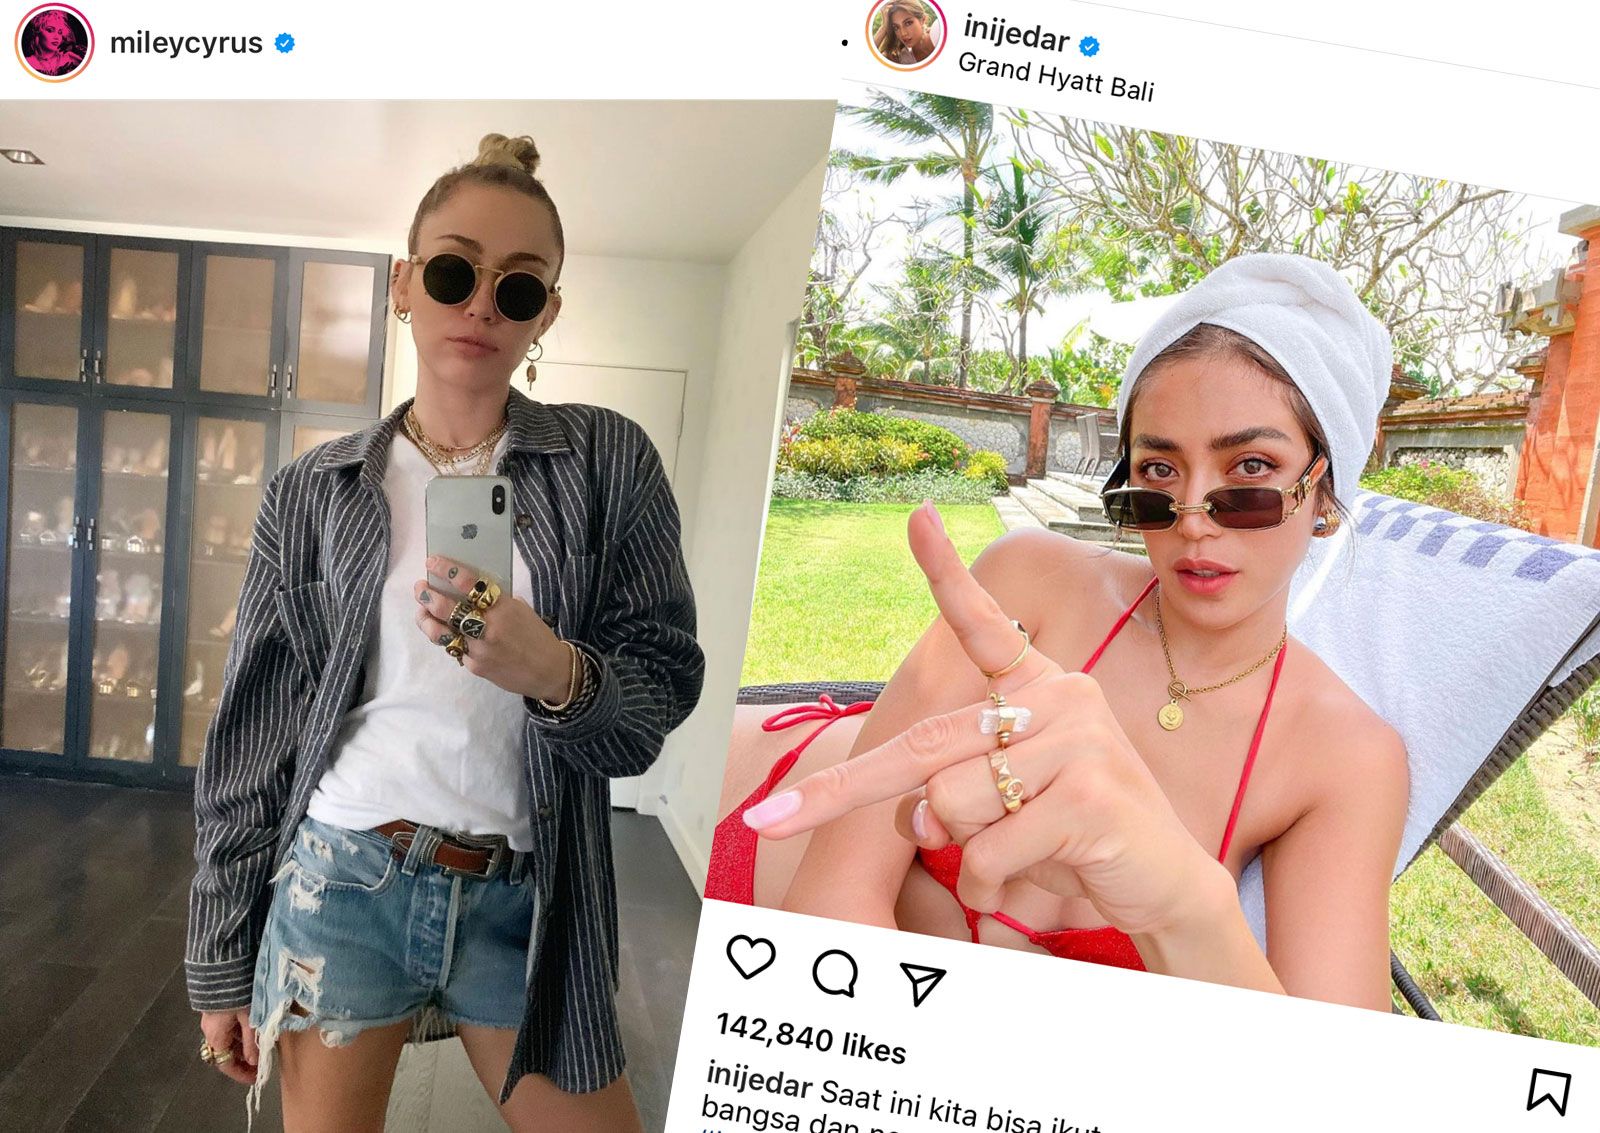 Celebrities like Miley Cyrus and Jessica Iskandar showcasing their personal jewellery collections and styling choices on Instagram